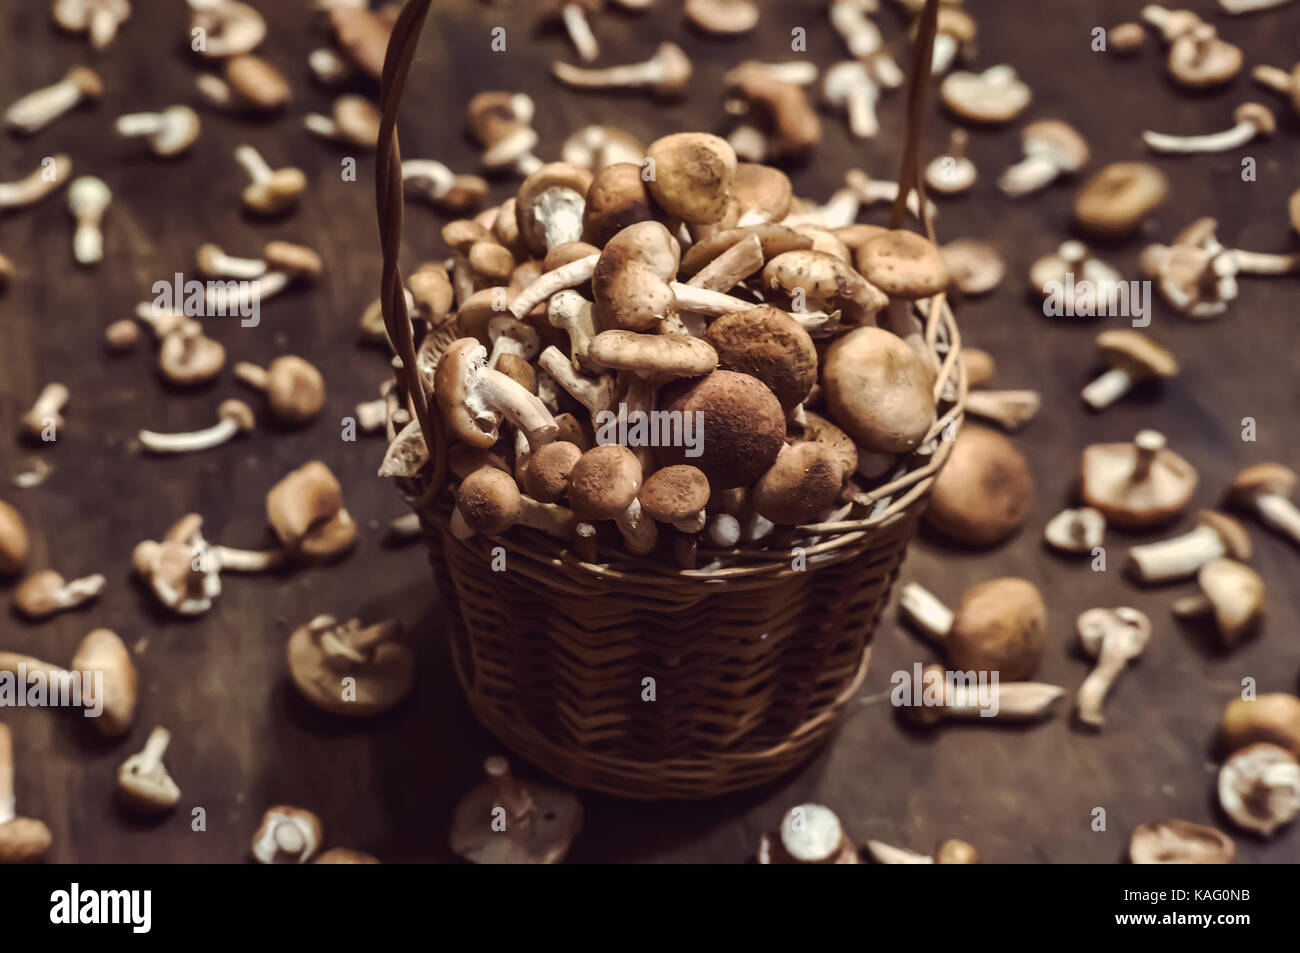 Armillaria mellea commonly known as honey fungus in the heaped wicker basket. The full wicker basket of mushrooms Fresh edible natural mushrooms Armil Stock Photo